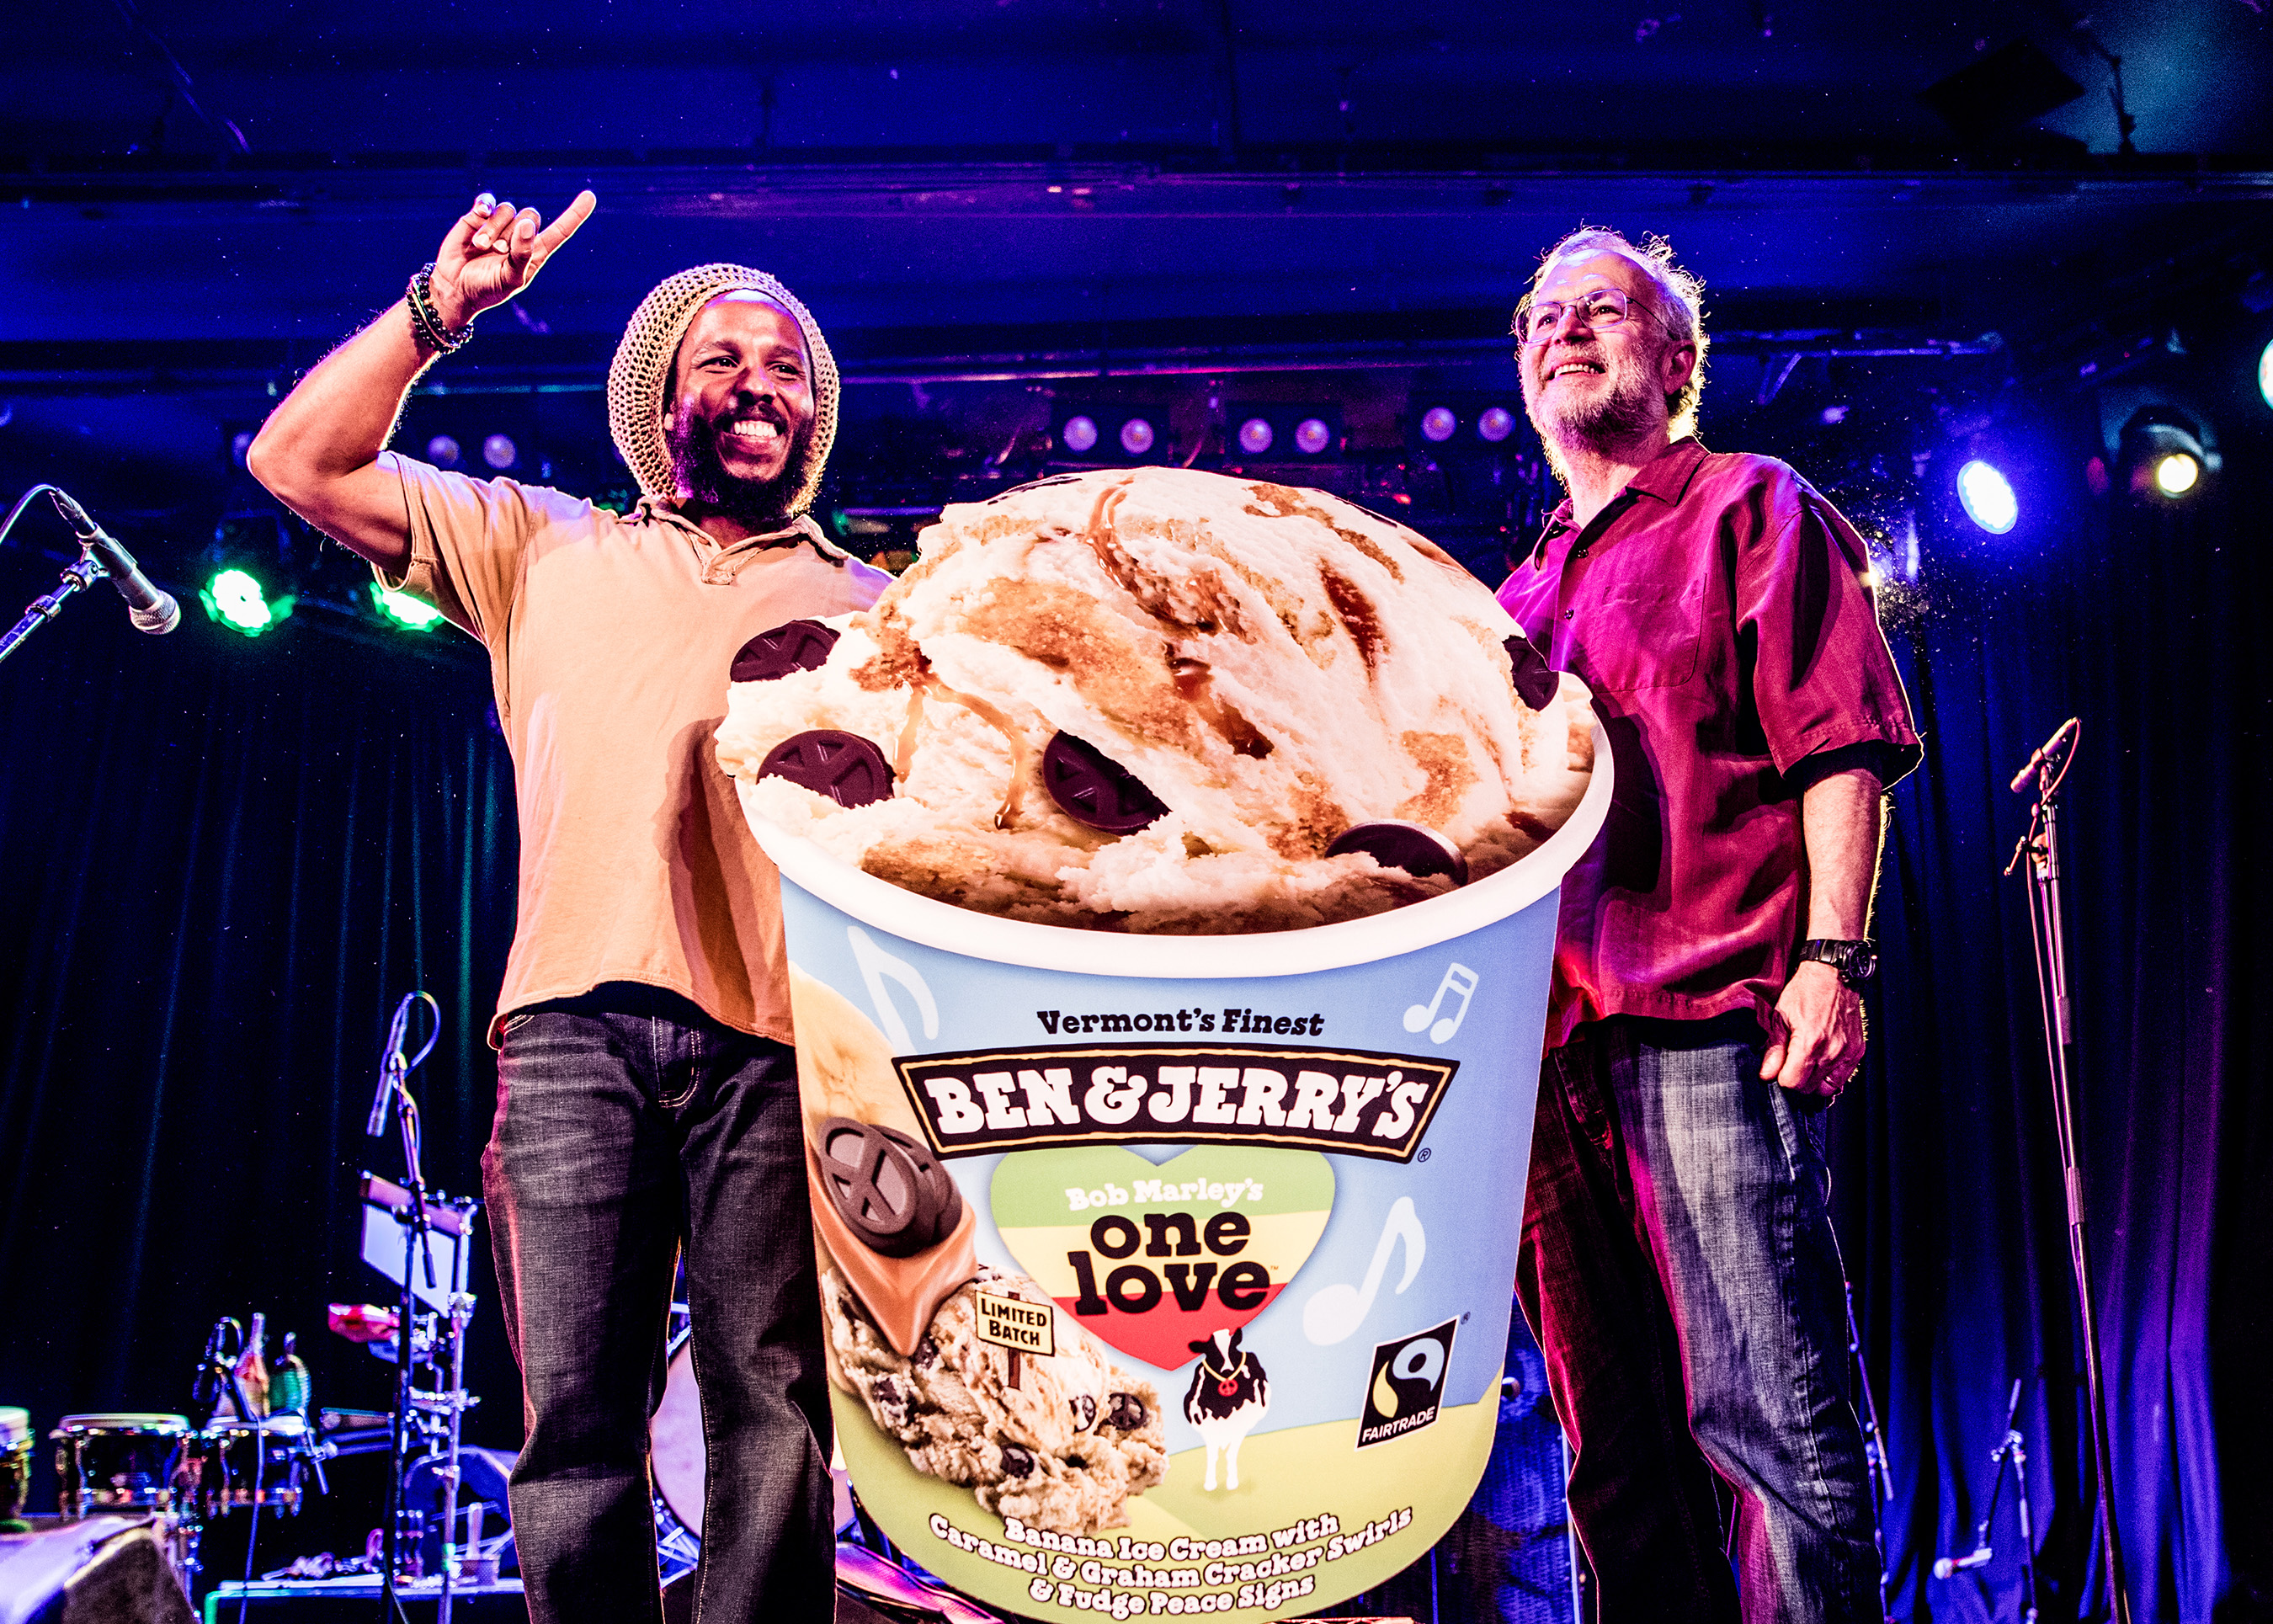 Ben & Jerry’s and Ziggy Marley celebrated the launch of the new One Love limited batch flavor available at Scoop Shops and retailers nationwide in Los Angeles at the Roxy Theatre on Monday, May 22.